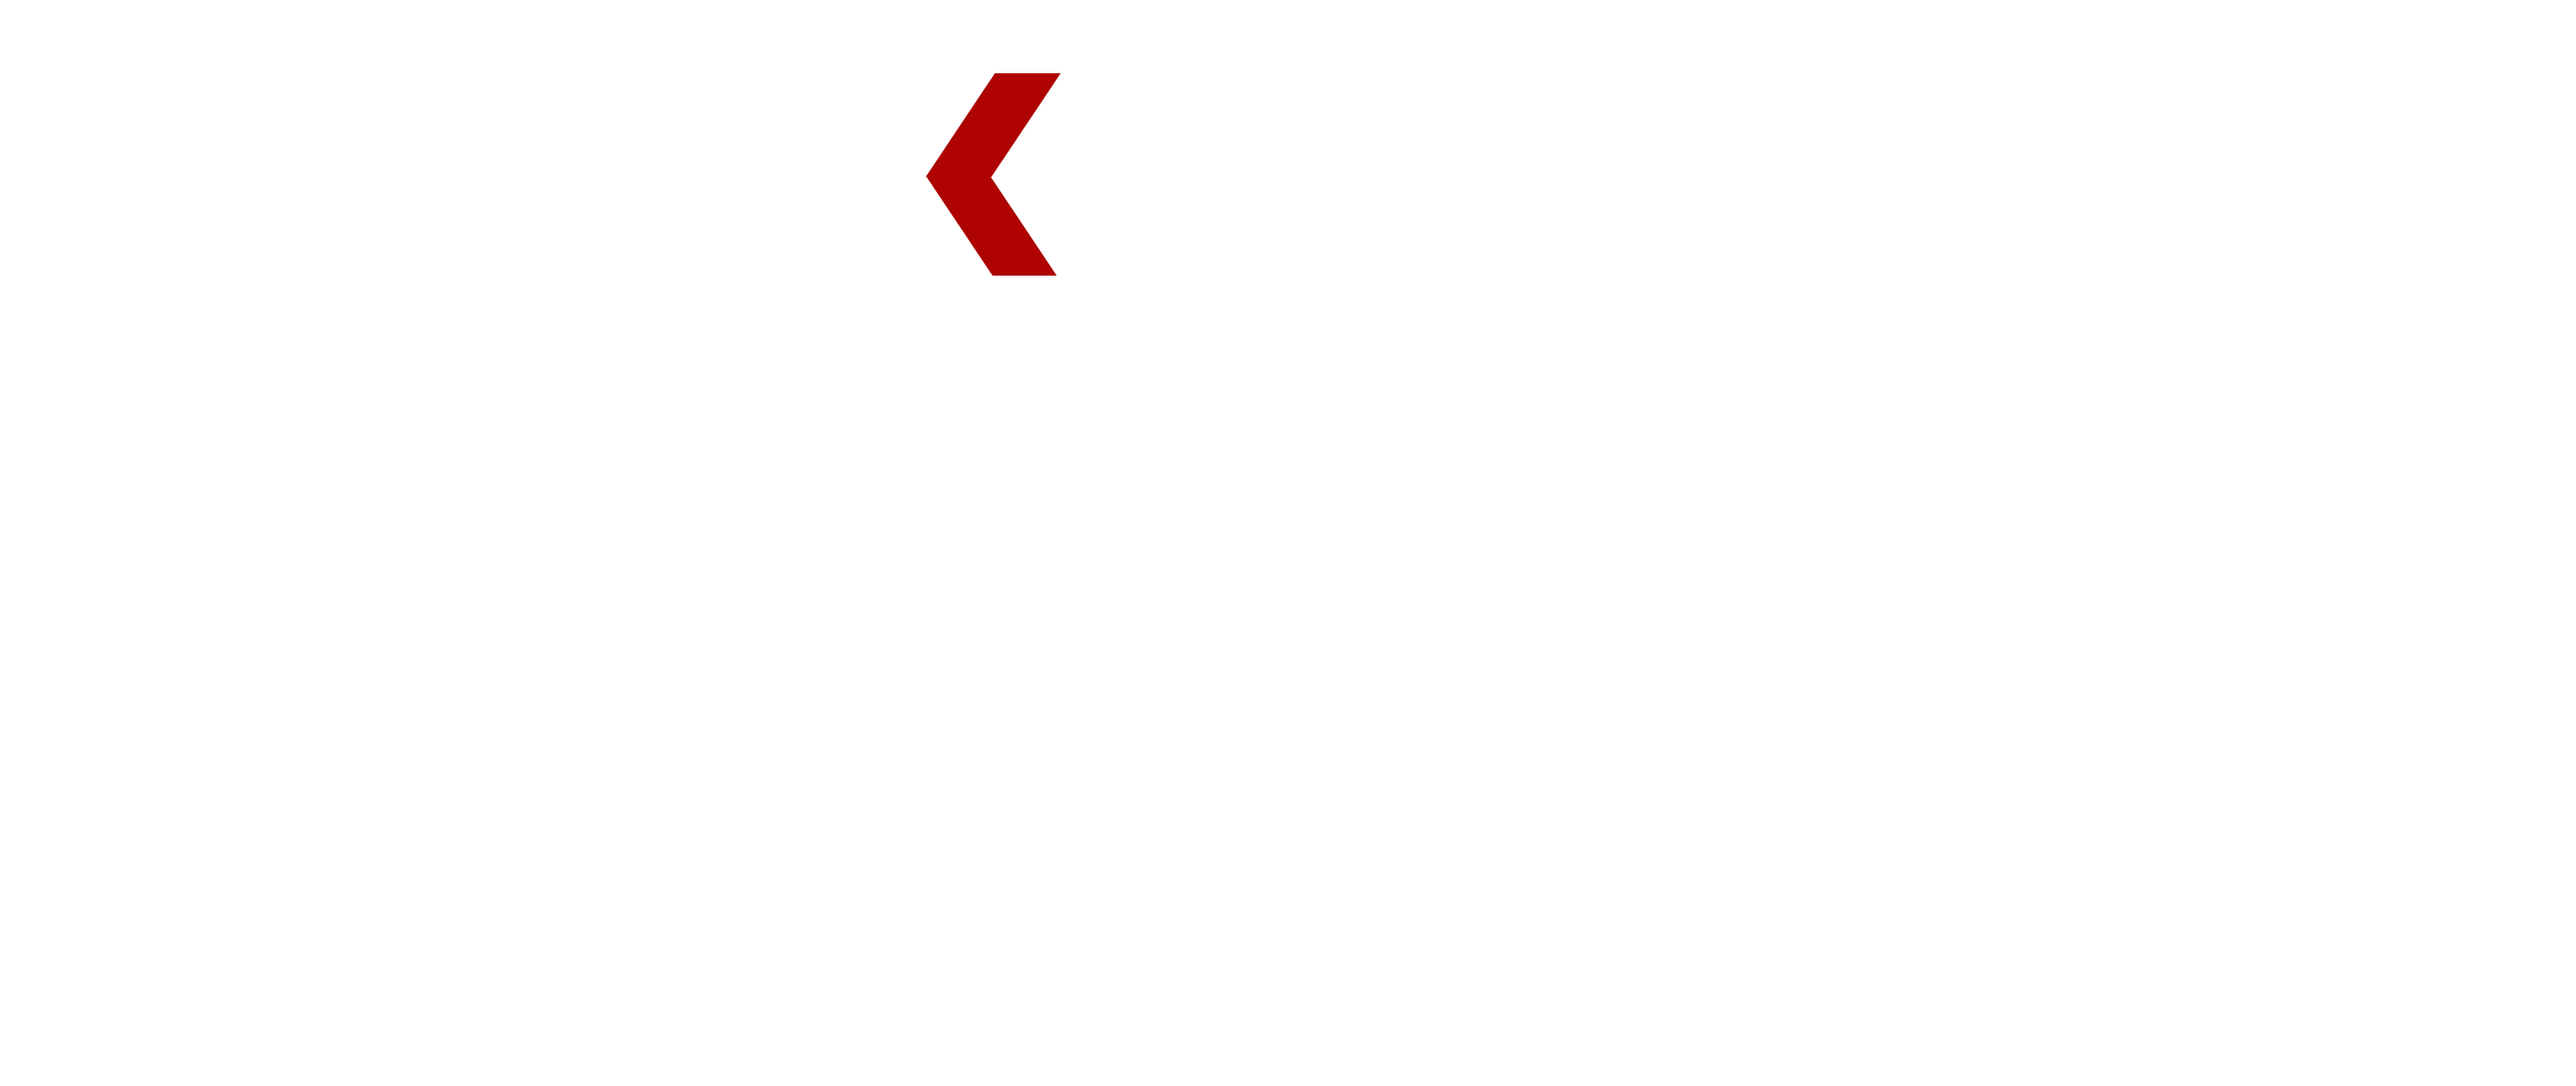 Marketing takes a day to learn...and decades to master.